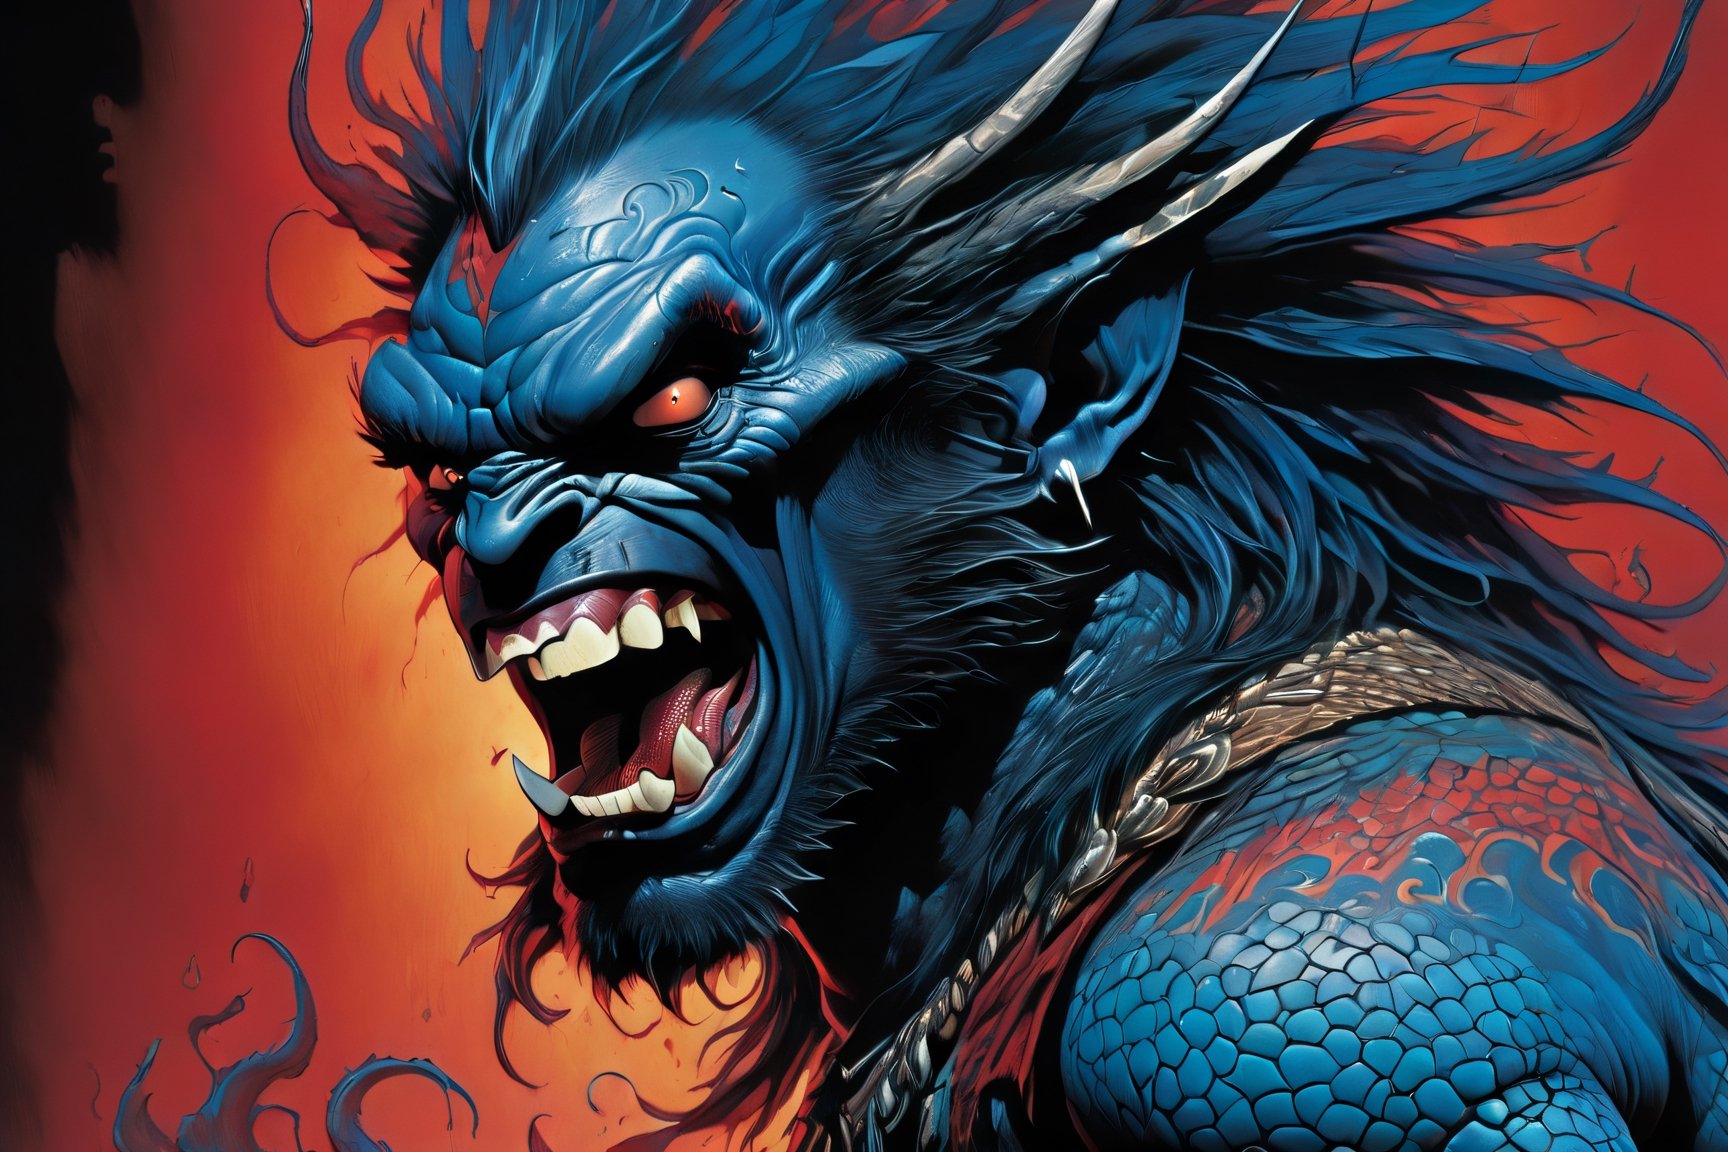 close up of the mans face, a sexy black african mans arm and shoulder, man is staring screaming at the viewer, raging, long hair, the arm and shoulder are covered in a very detailed intricate red and blue dragon tattoo that is protruding outfrom the skin, coming alive, its screaming, scratching, similar to dragon tattoo by Boris Vallejo, slowly you see the small dragon tattoo in parts is coming out of the skin and becoming a real version of the tattoo, sticking out, scales, extended claws, spit, spittle, blood drops, 16K, movie still, cinematic, ,omatsuri,DonMn1ghtm4reXL,DonMWr41thXL ,potma style